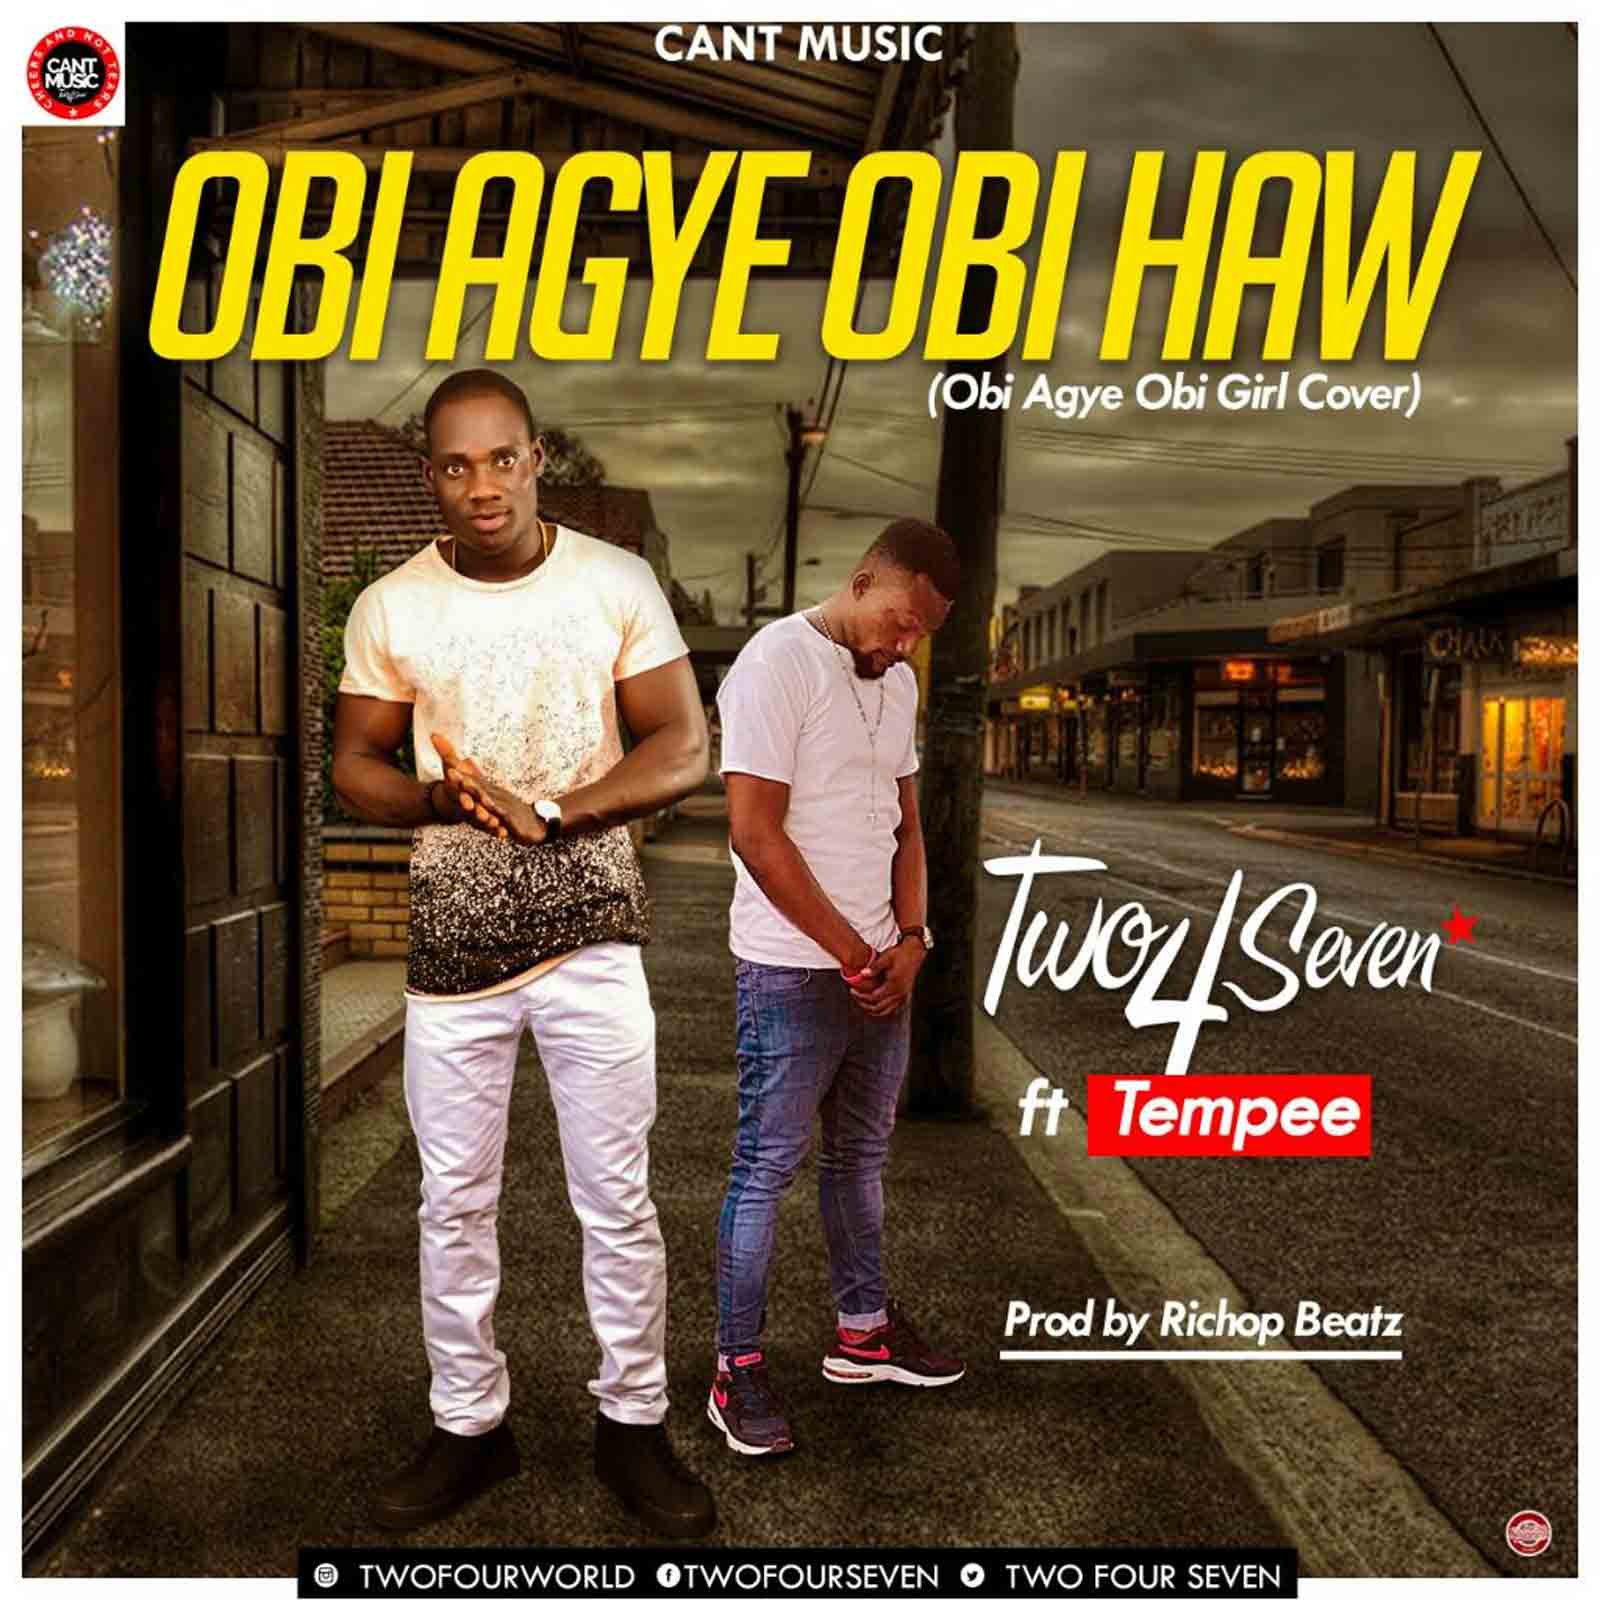 Obi Agye Wo Haw by Two4Seven feat. Tempee